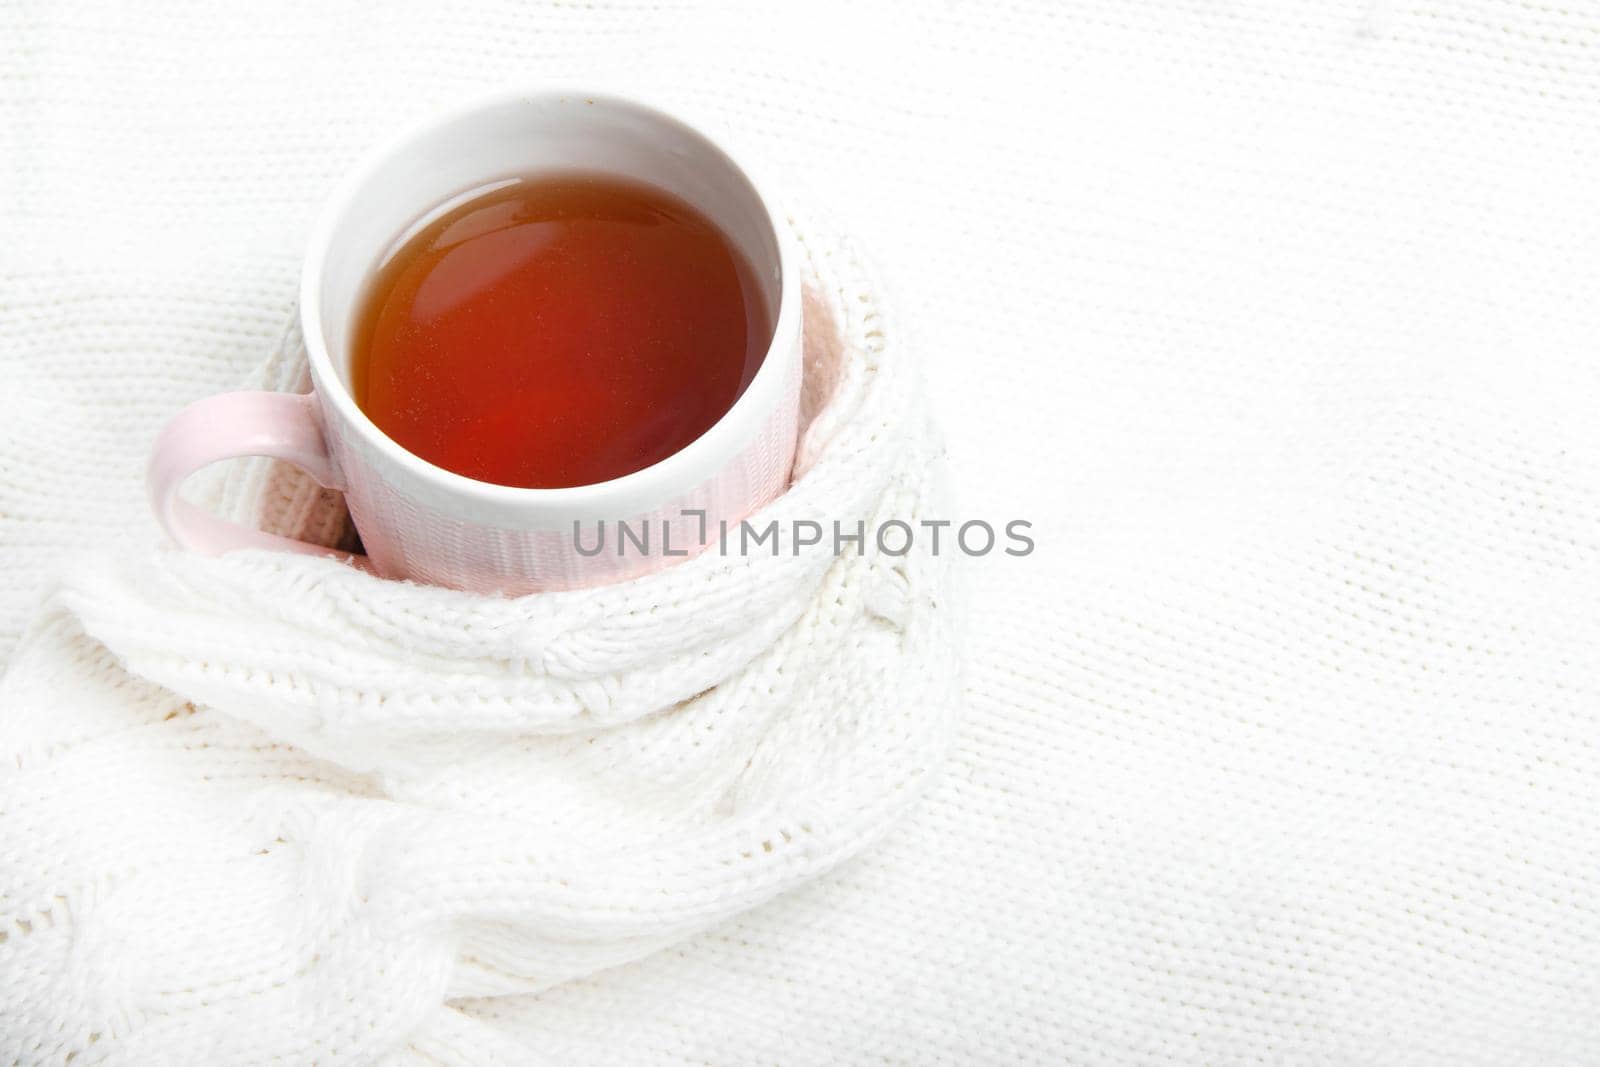 A Cup of tea in a knitted sweater . Hot tea. Autumn. Autumn mood. A knitted item. Tea in a Cup. Cold season. Copy space